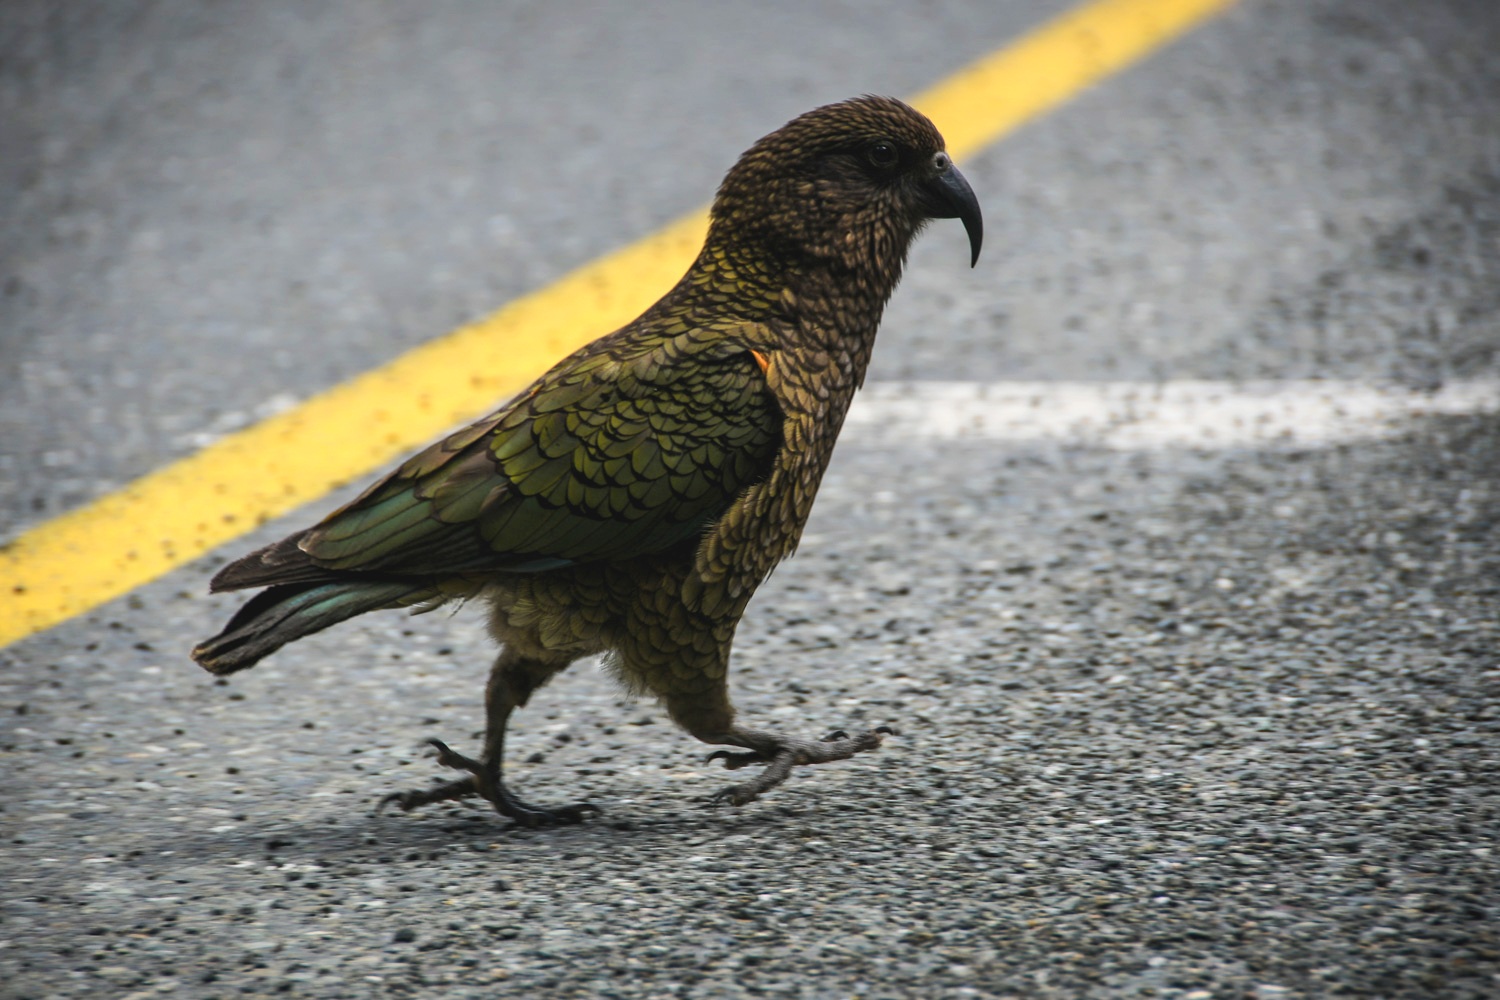 Why did the Kea cross the road? …To go gnaw on the tourists’ cars on the other side! (True Story!)